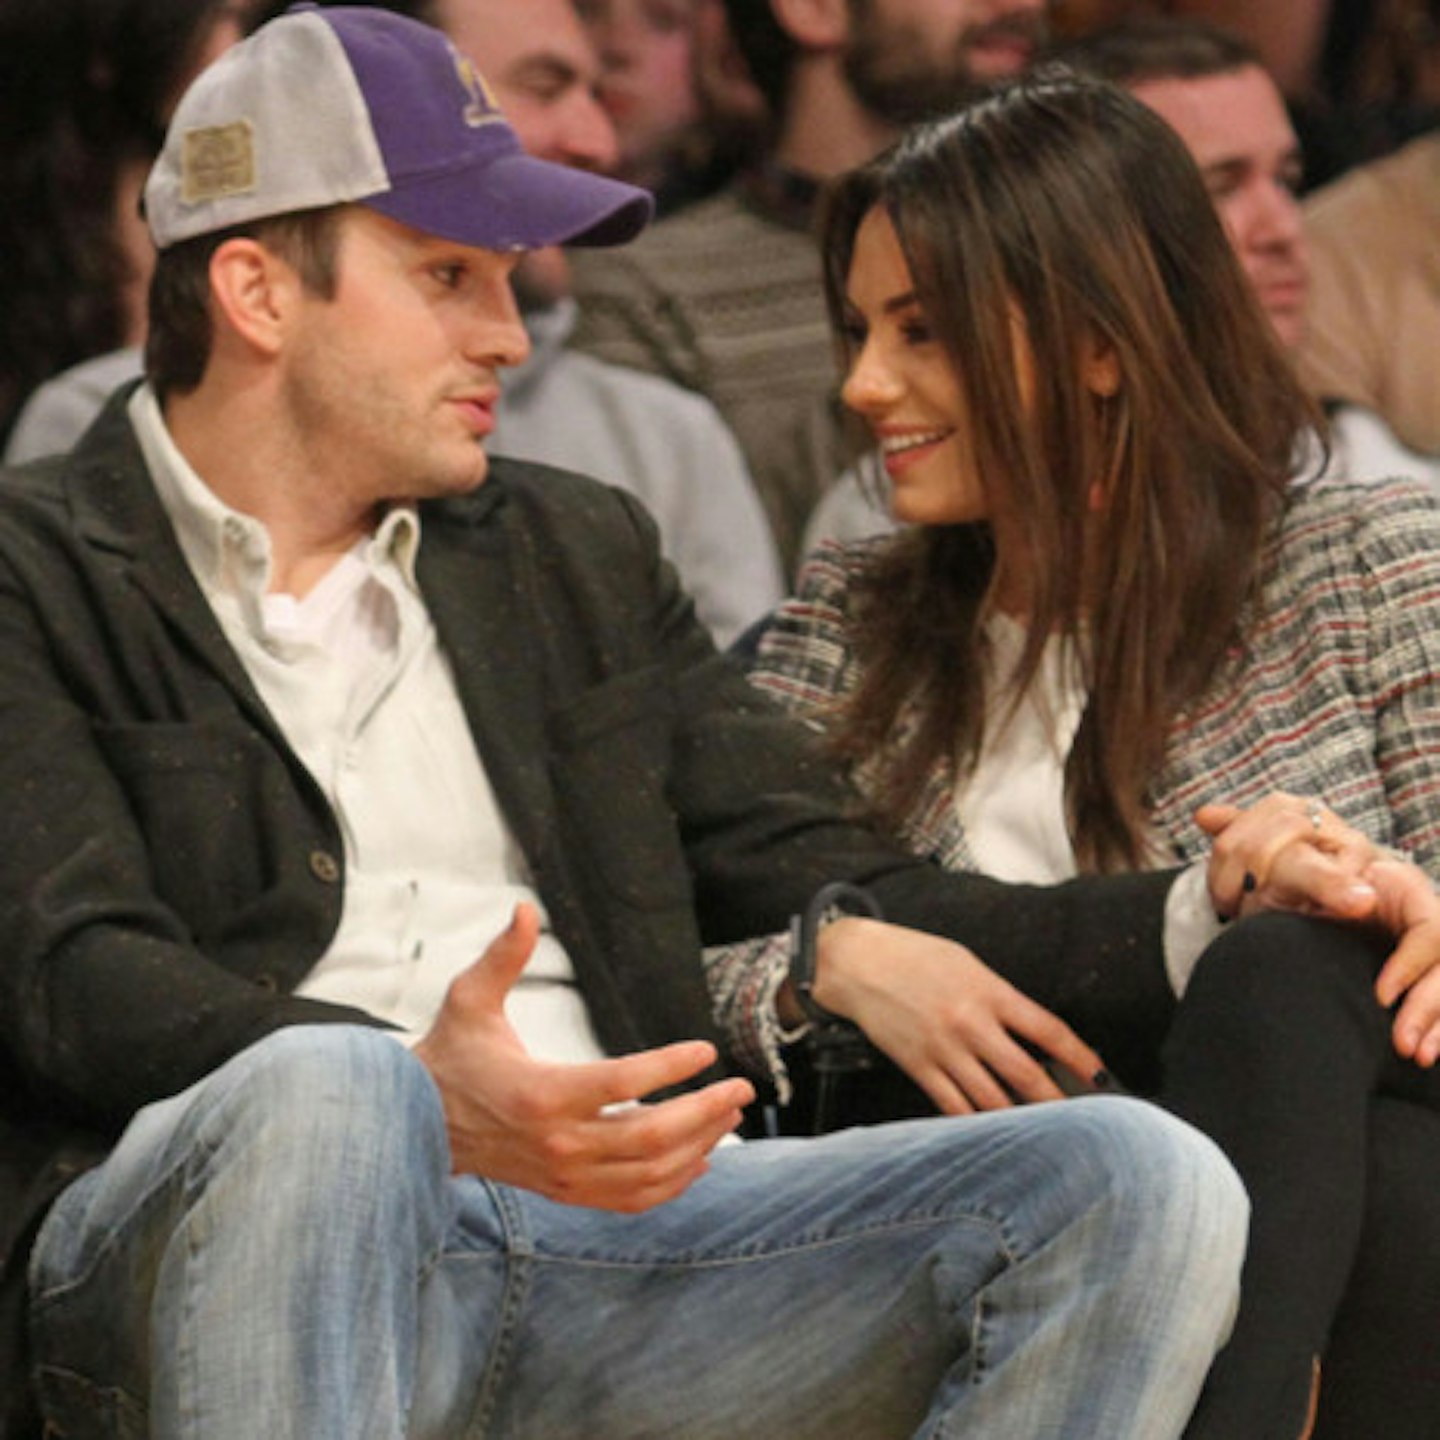 Mila gave birth to their first child last month